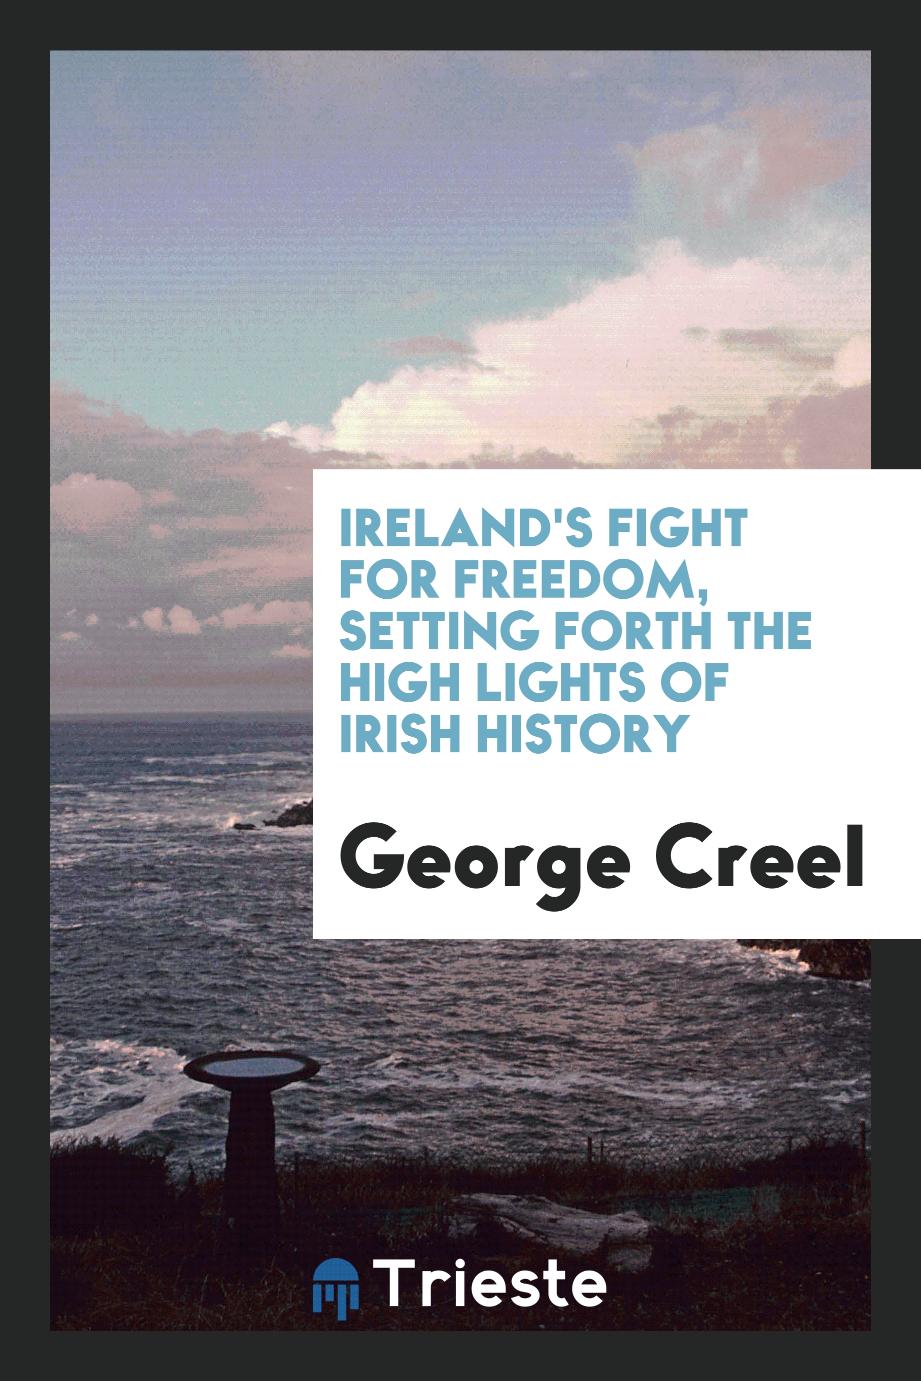 Ireland's fight for freedom, setting forth the high lights of Irish history